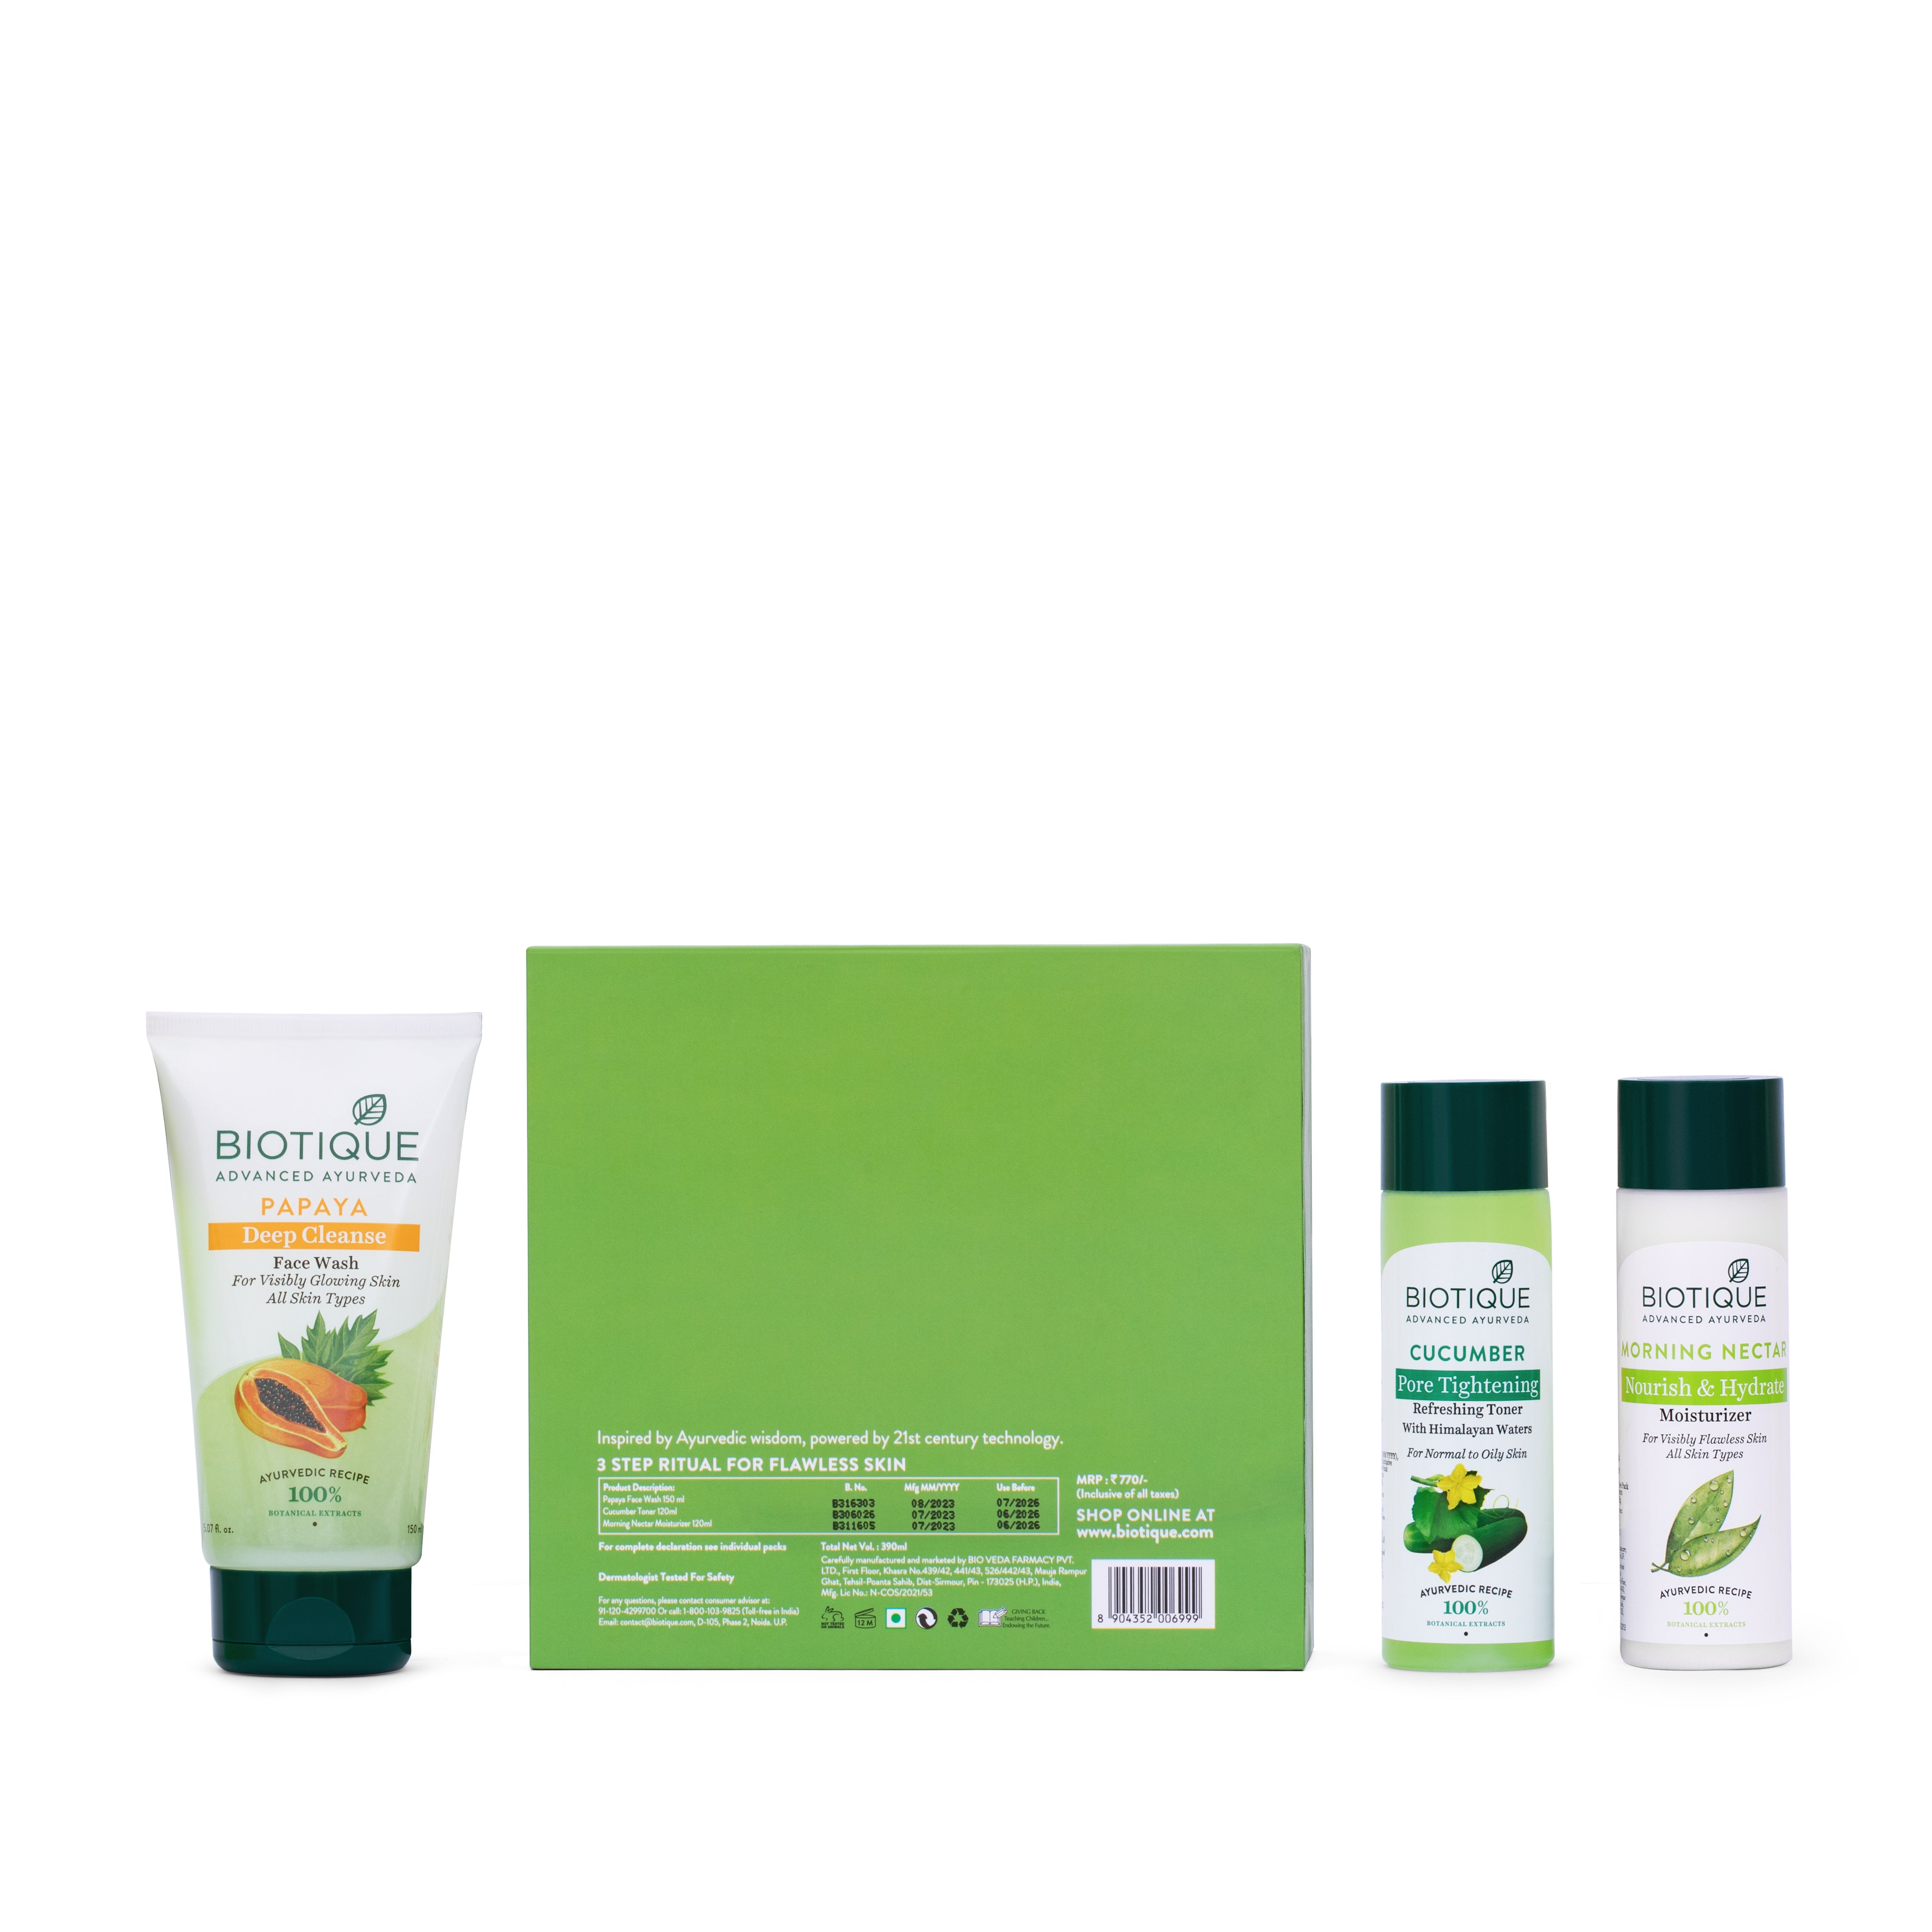 DAILY SKIN CARE ESSENTIAL GIFT KIT